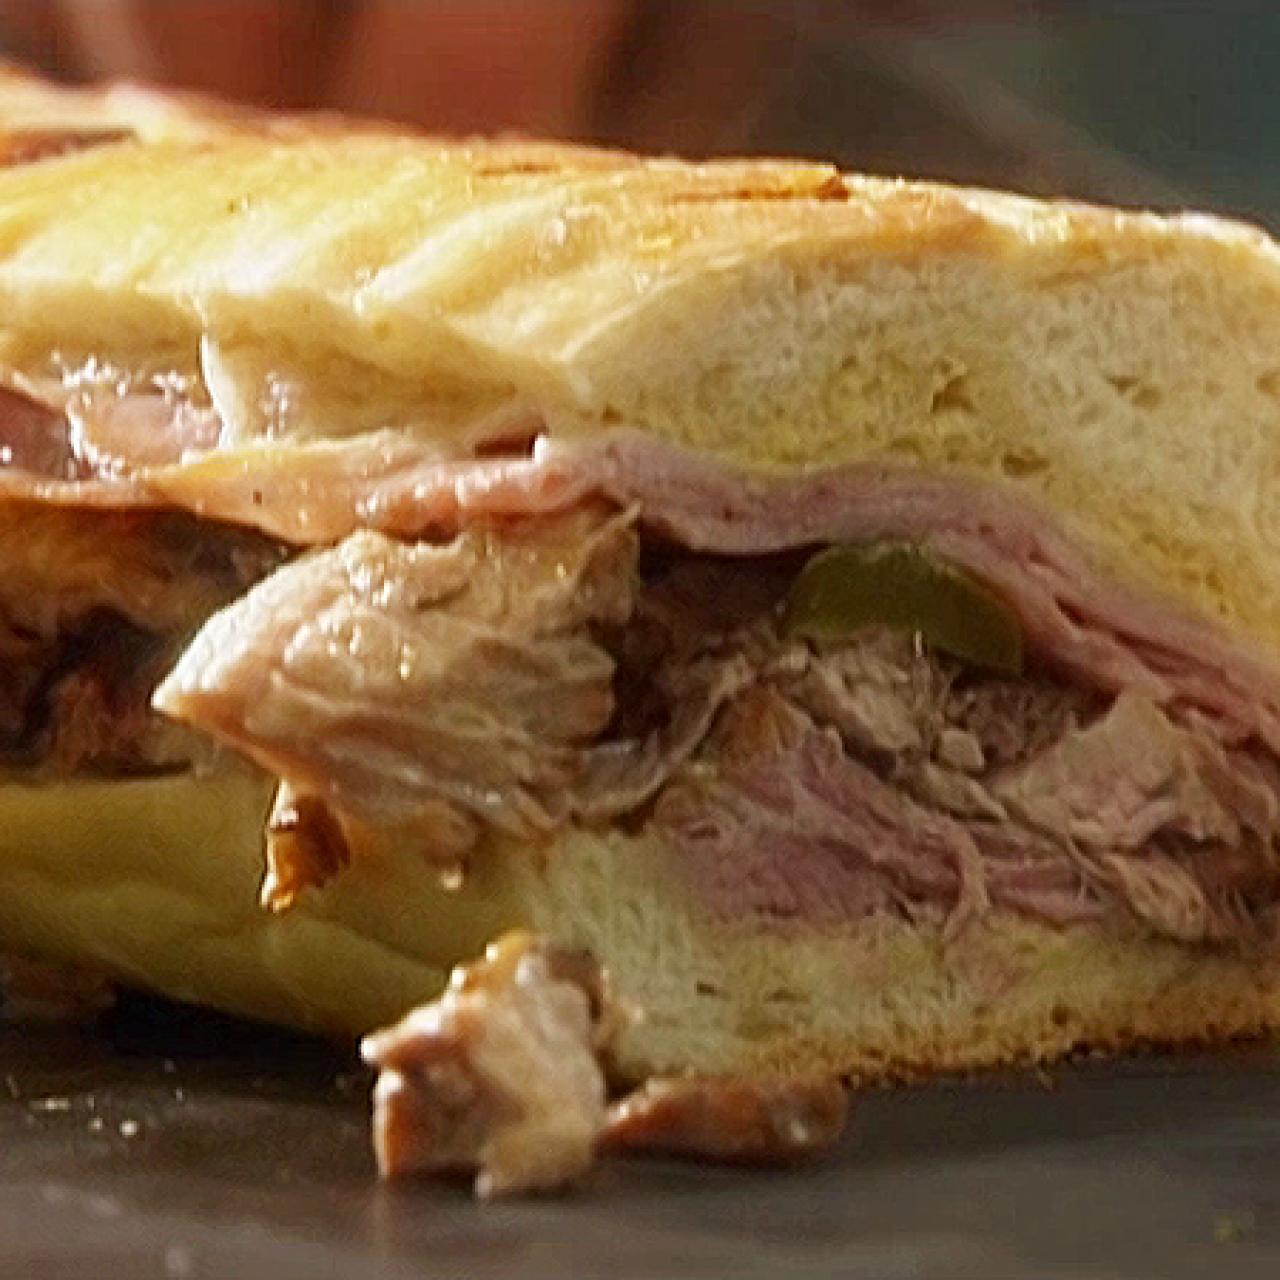 The Cubano Sandwiches from Chef